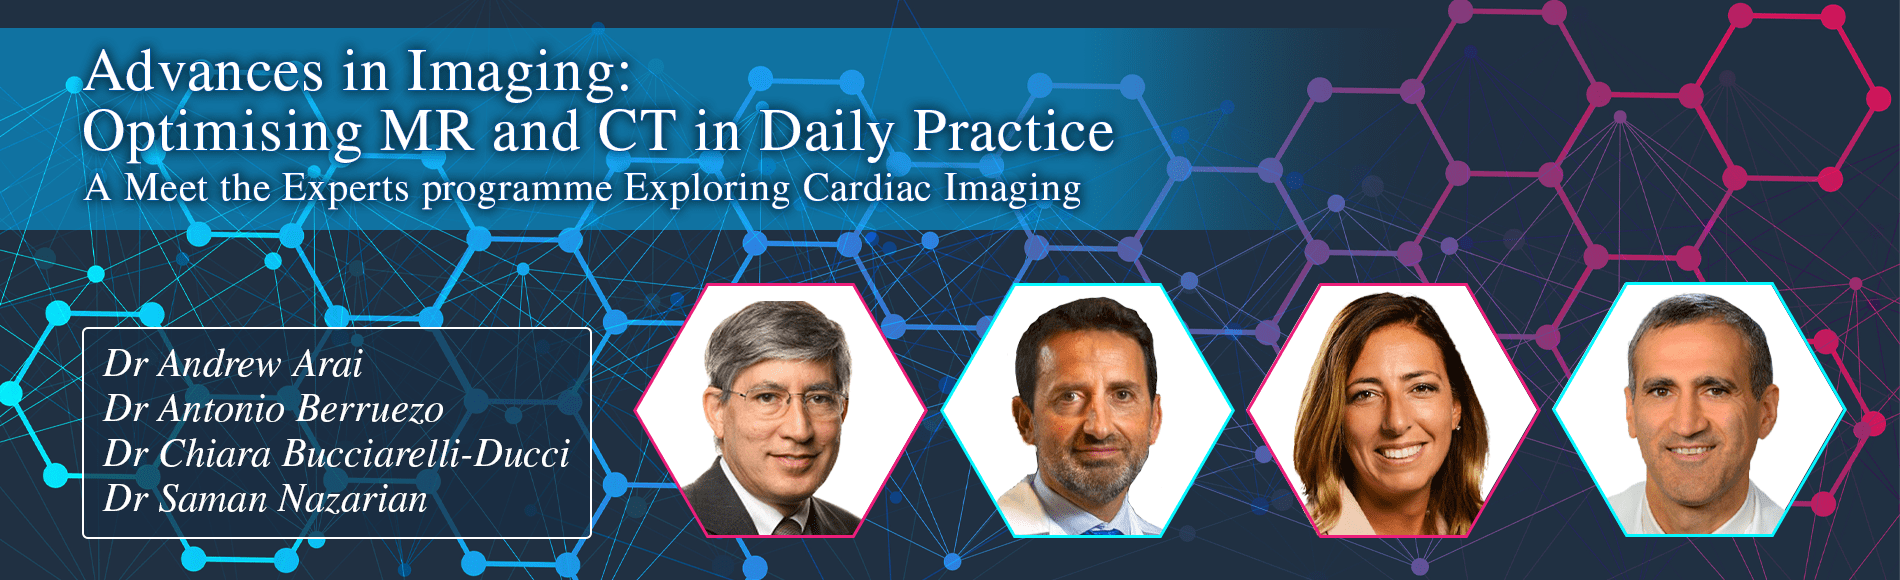 Advances in Imaging: Optimising MR and CT in Daily Practice